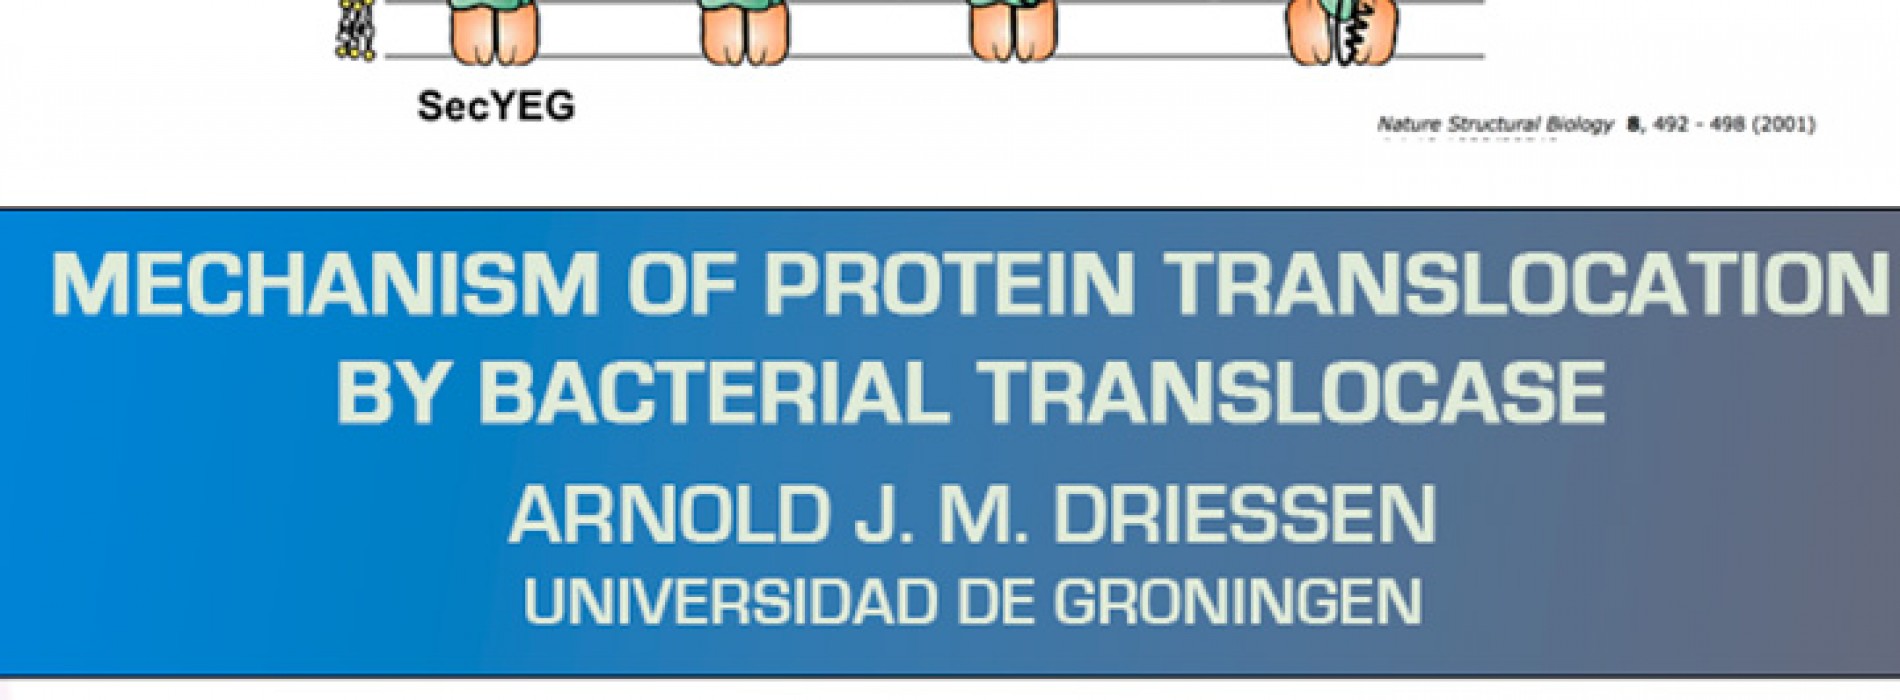 Charla: «Mechanism of Protein Translocation by Bacterial Translocase» – Arnold J. M. Driessen